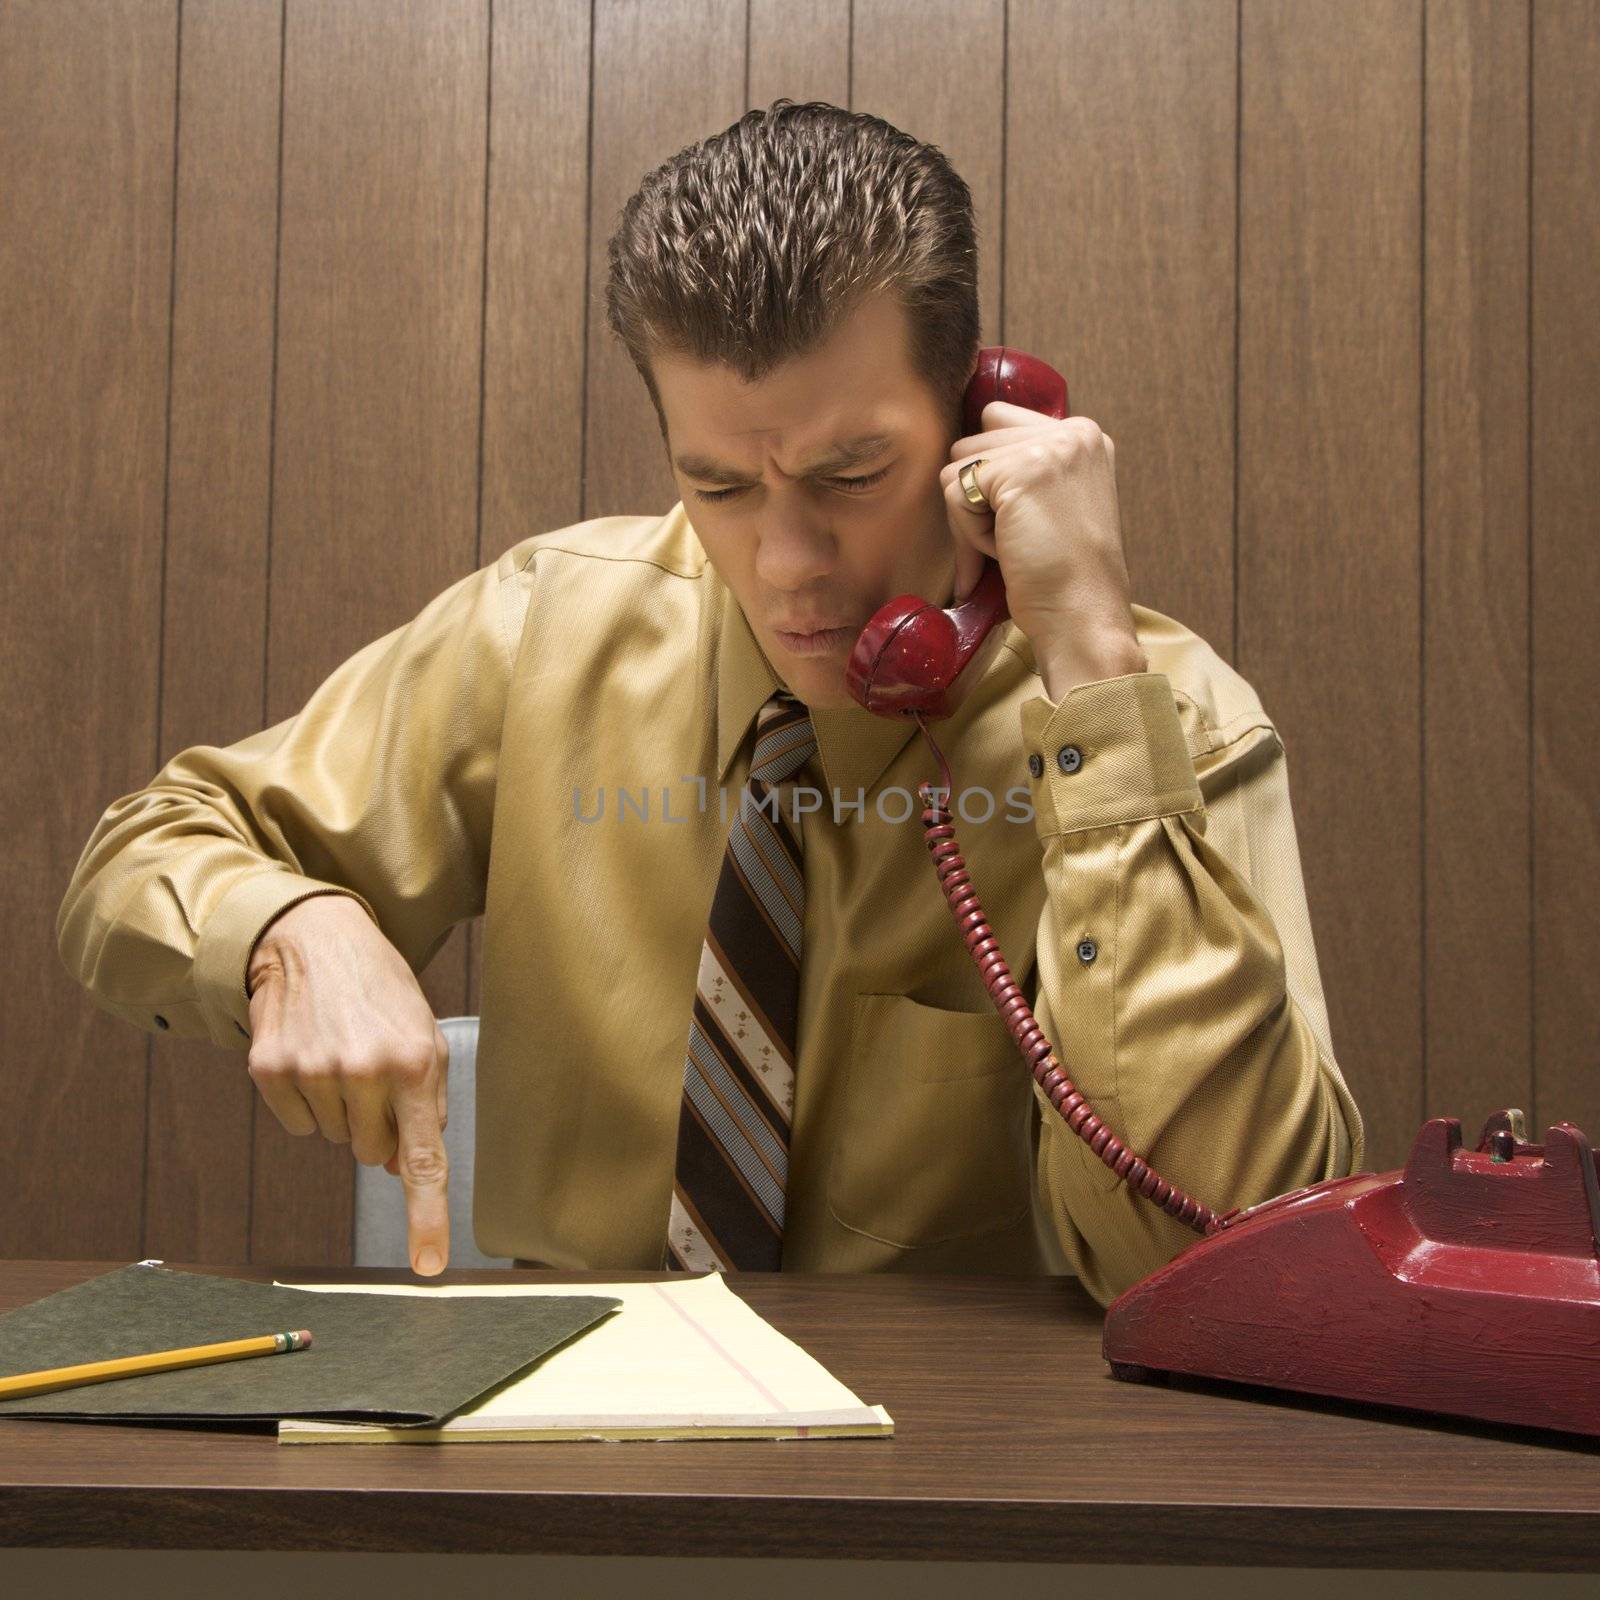 Caucasion mid-adult retro businessman sitting at desk talking on telephone with angry expression.